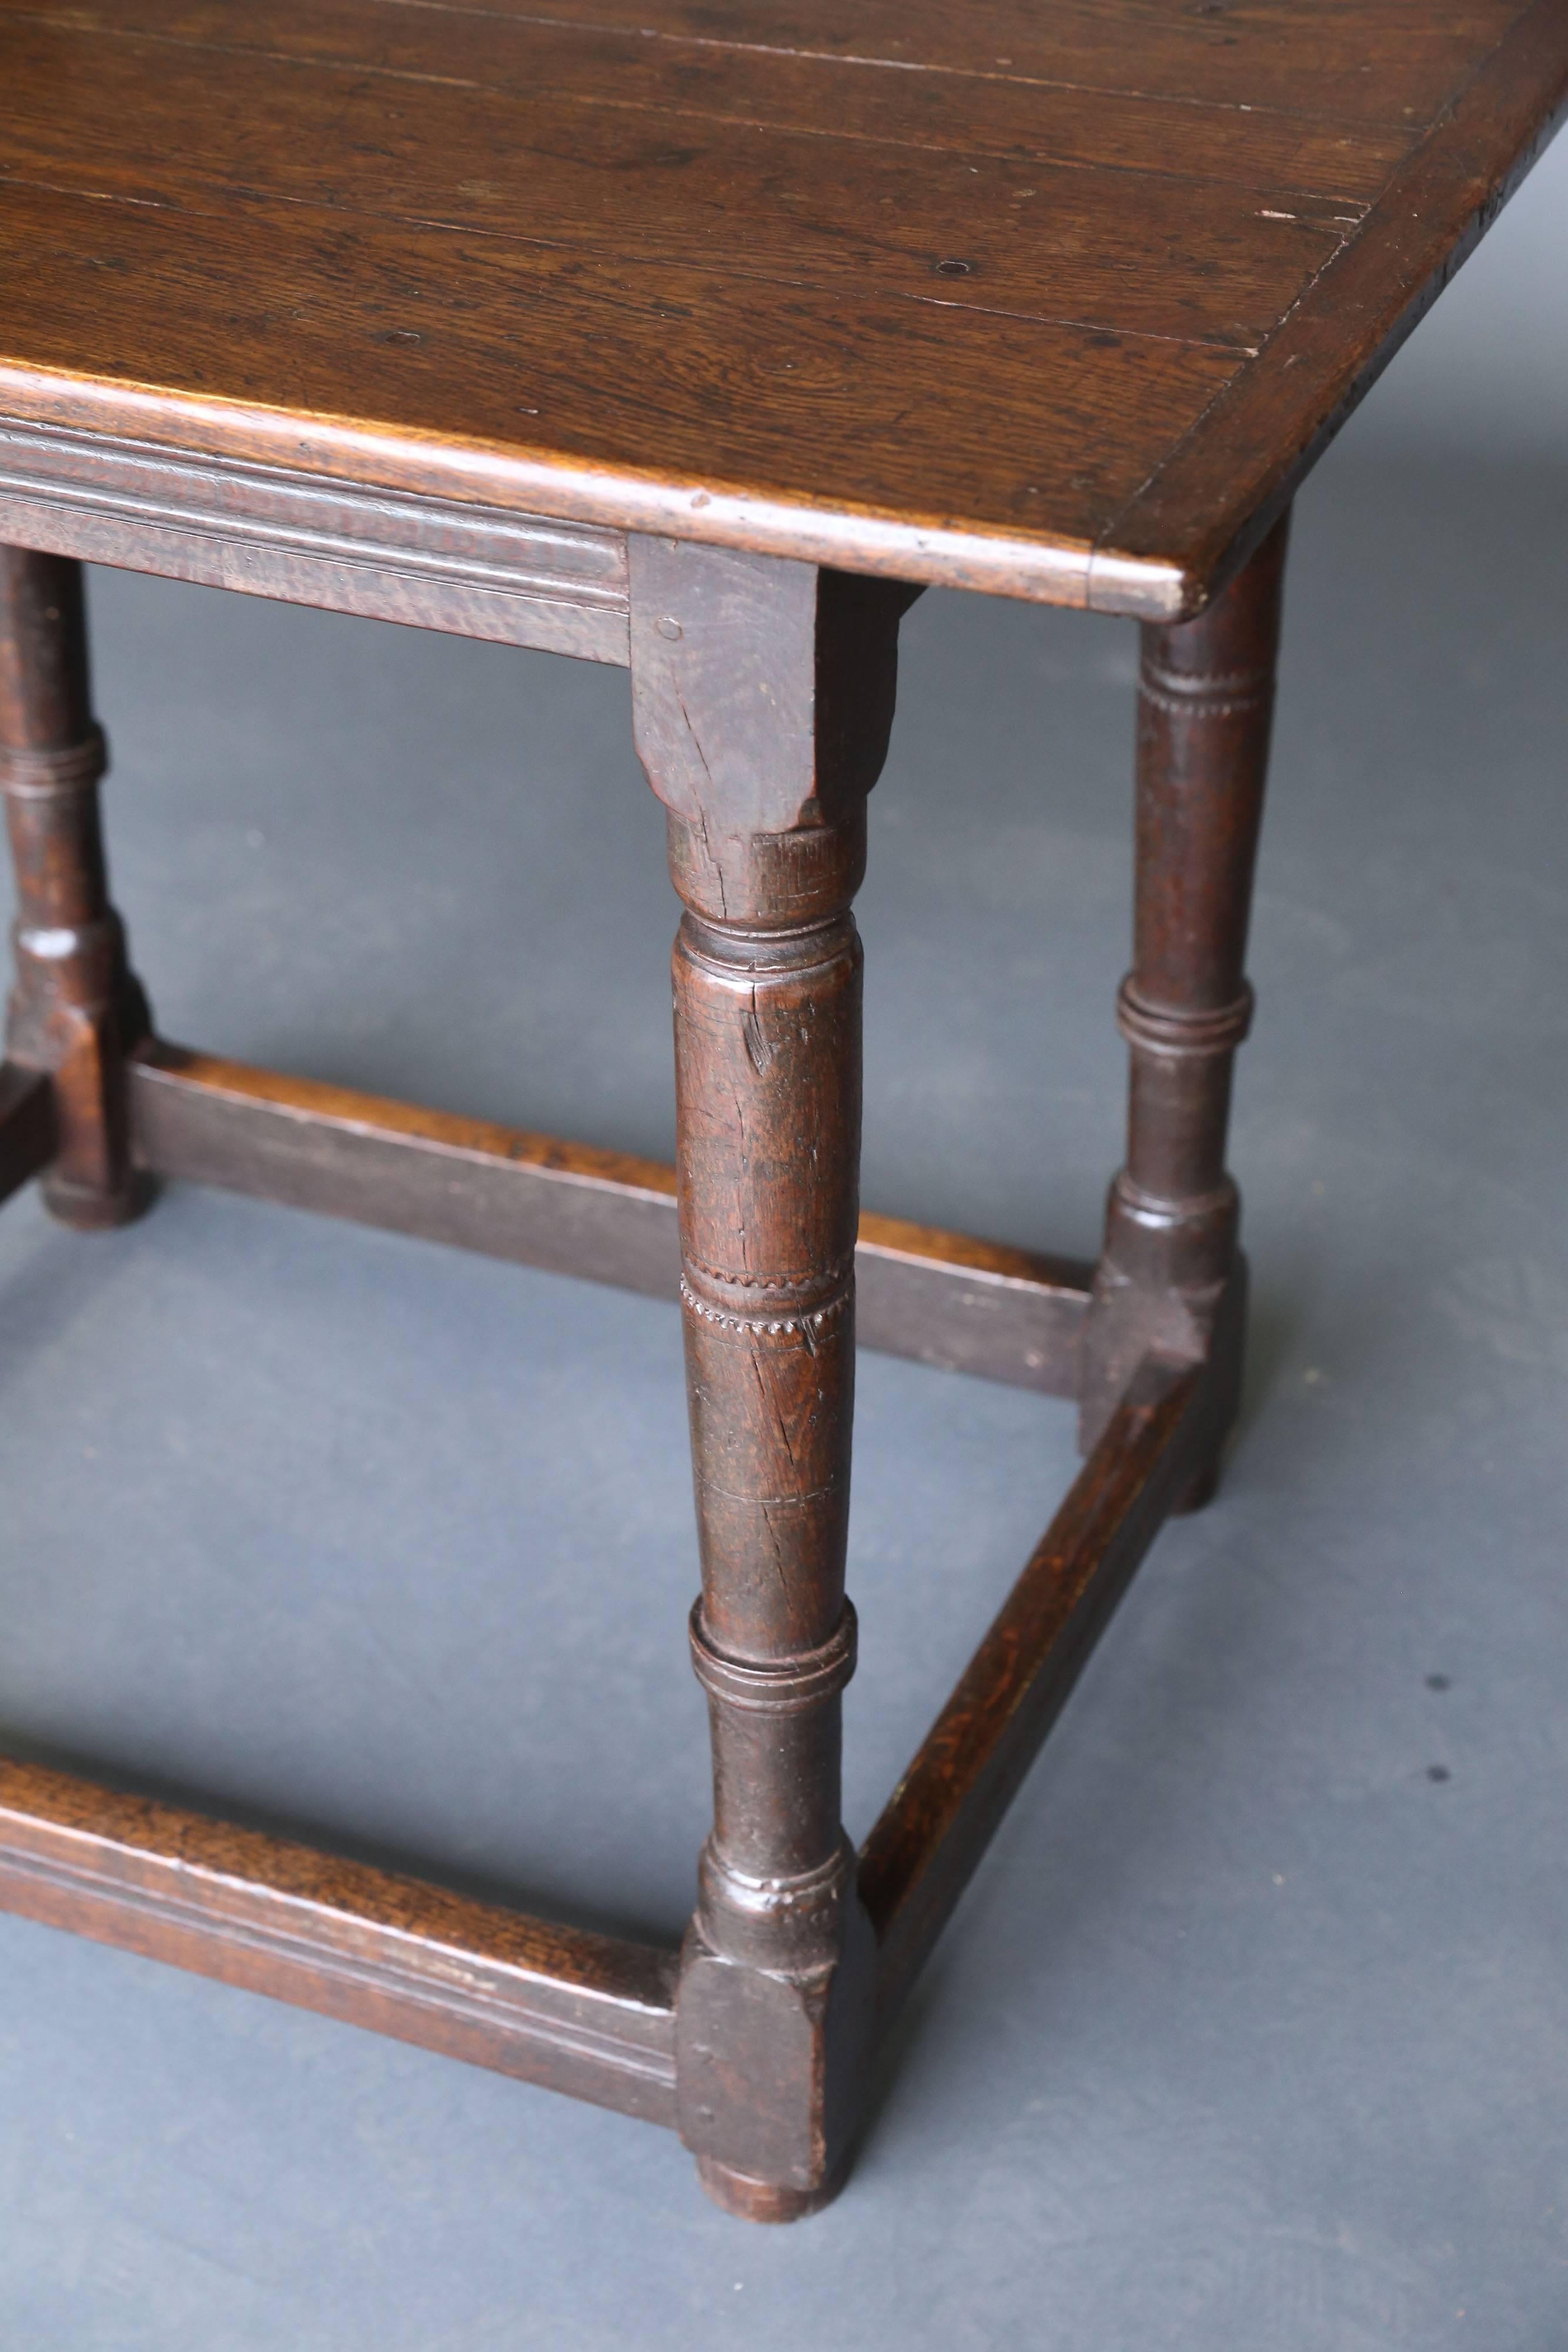 Great Britain (UK) 19th Century Small Side Table